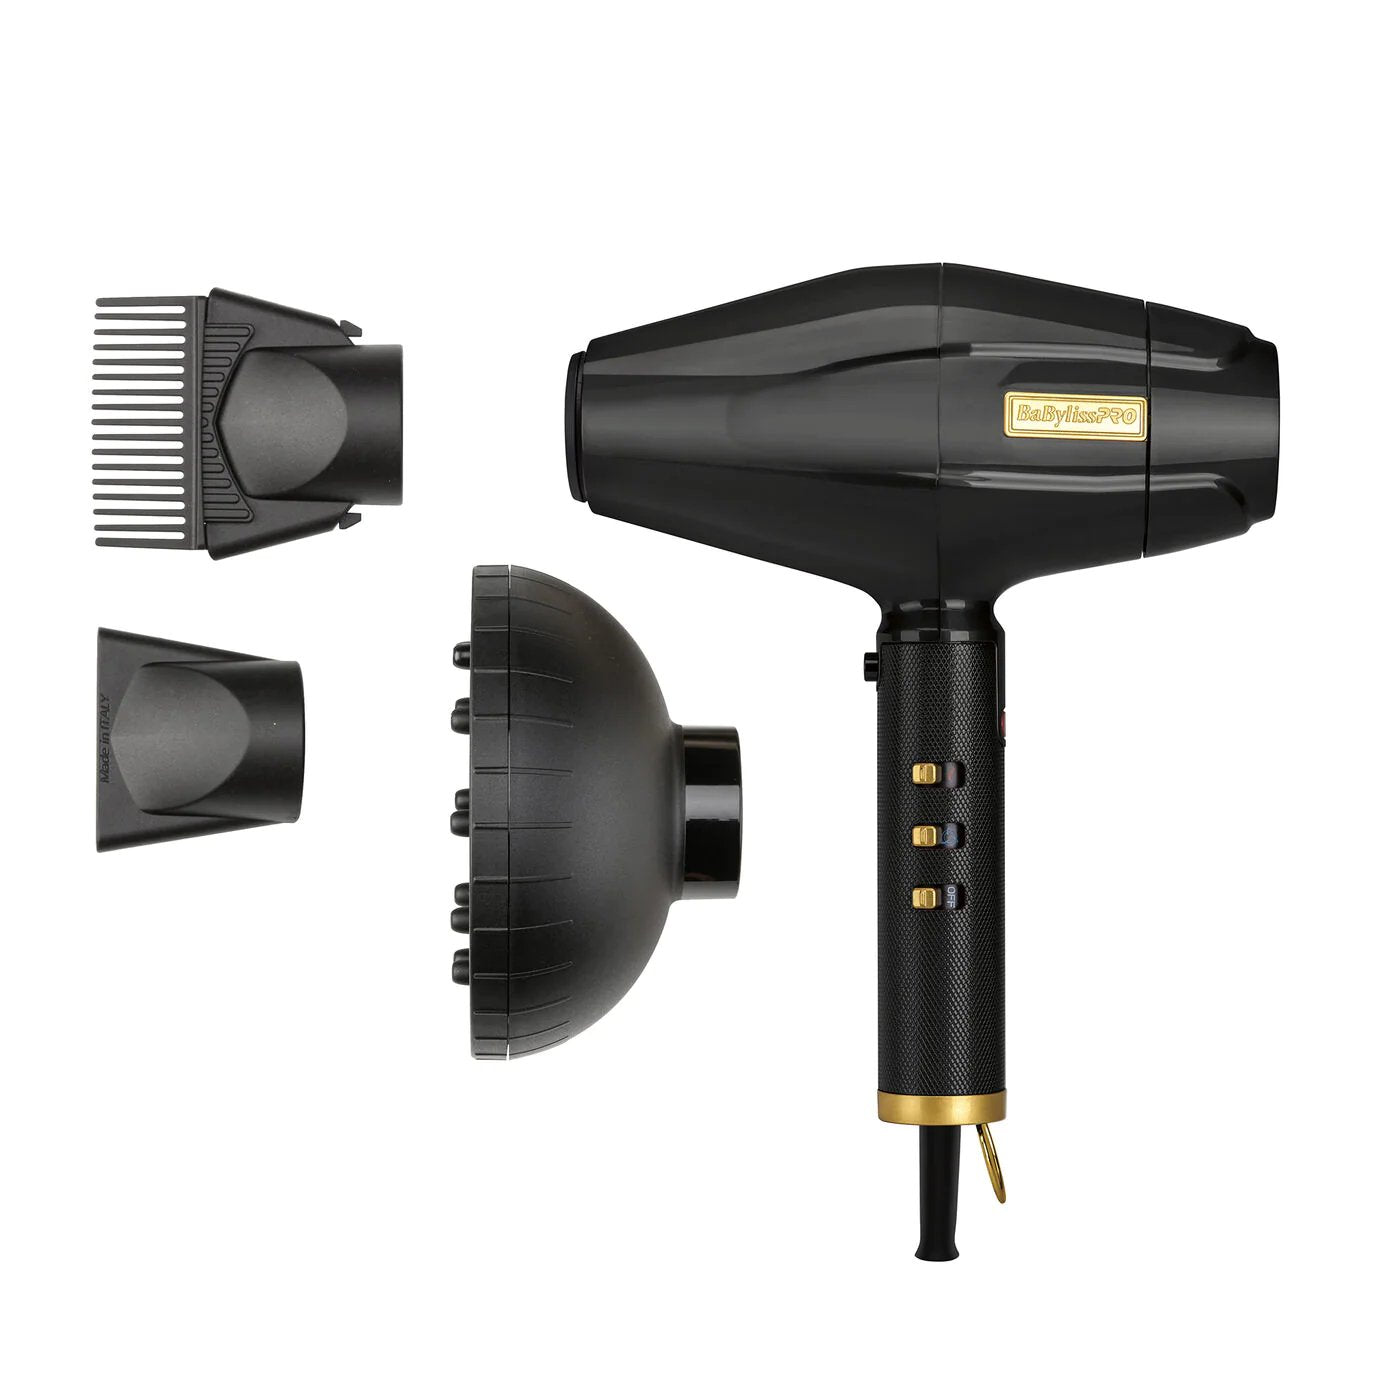  BaBylissPRO Barberology Hair Clipper For Men FX870GBP GOLDFX  BOOST+ Professional Clipper : Beauty & Personal Care